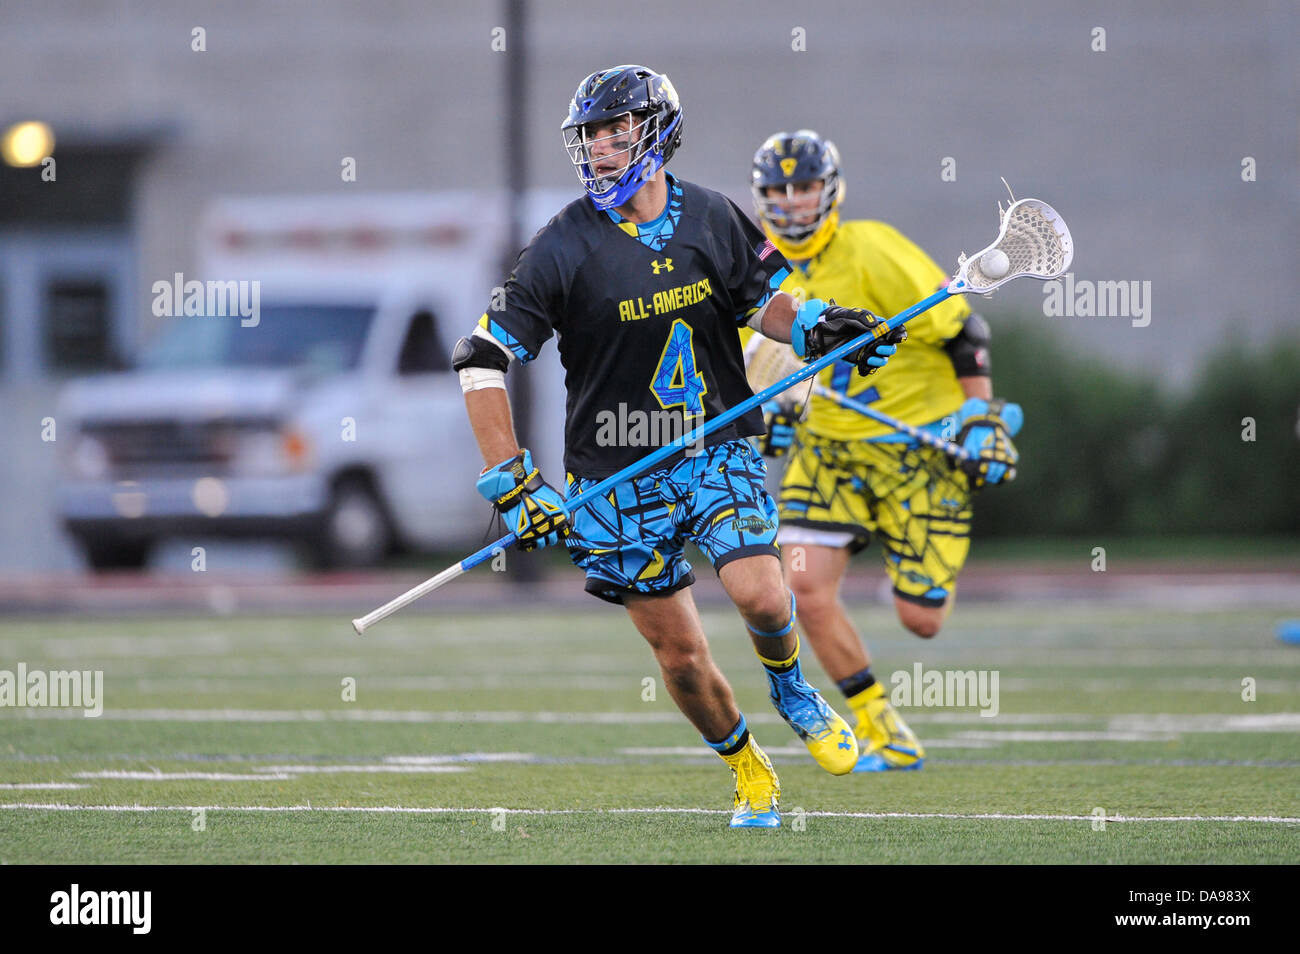 July 6, 2013 - Baltimore, MD, United States of America - July 6, 2013 Baltimore, MD.North All-Star Matt Ryan #4 in action during the 8th Annual Under Armour All-American Lacrosse Classic at Johnny Unitas Stadium Baltimore on July 6, 2013..South defeats North 28-24. Stock Photo